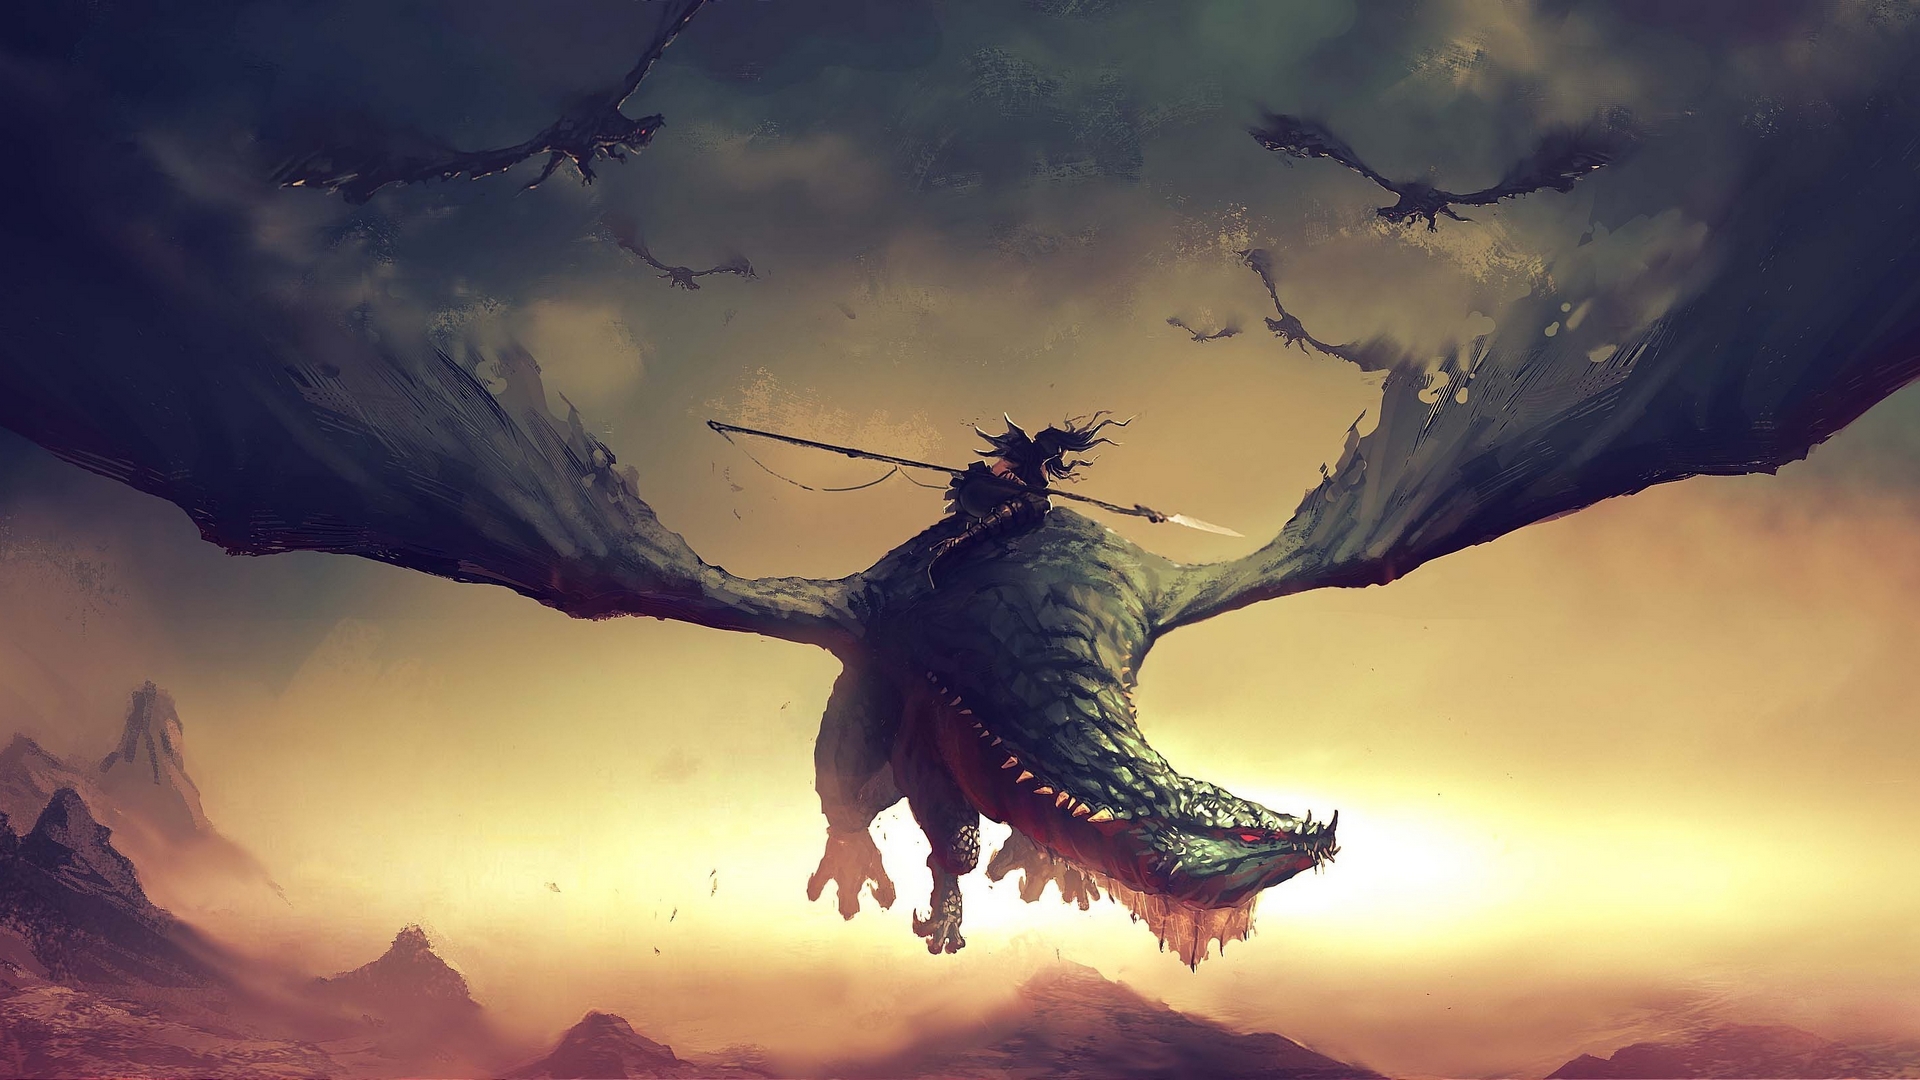 Dragons, wyverns and wyrms